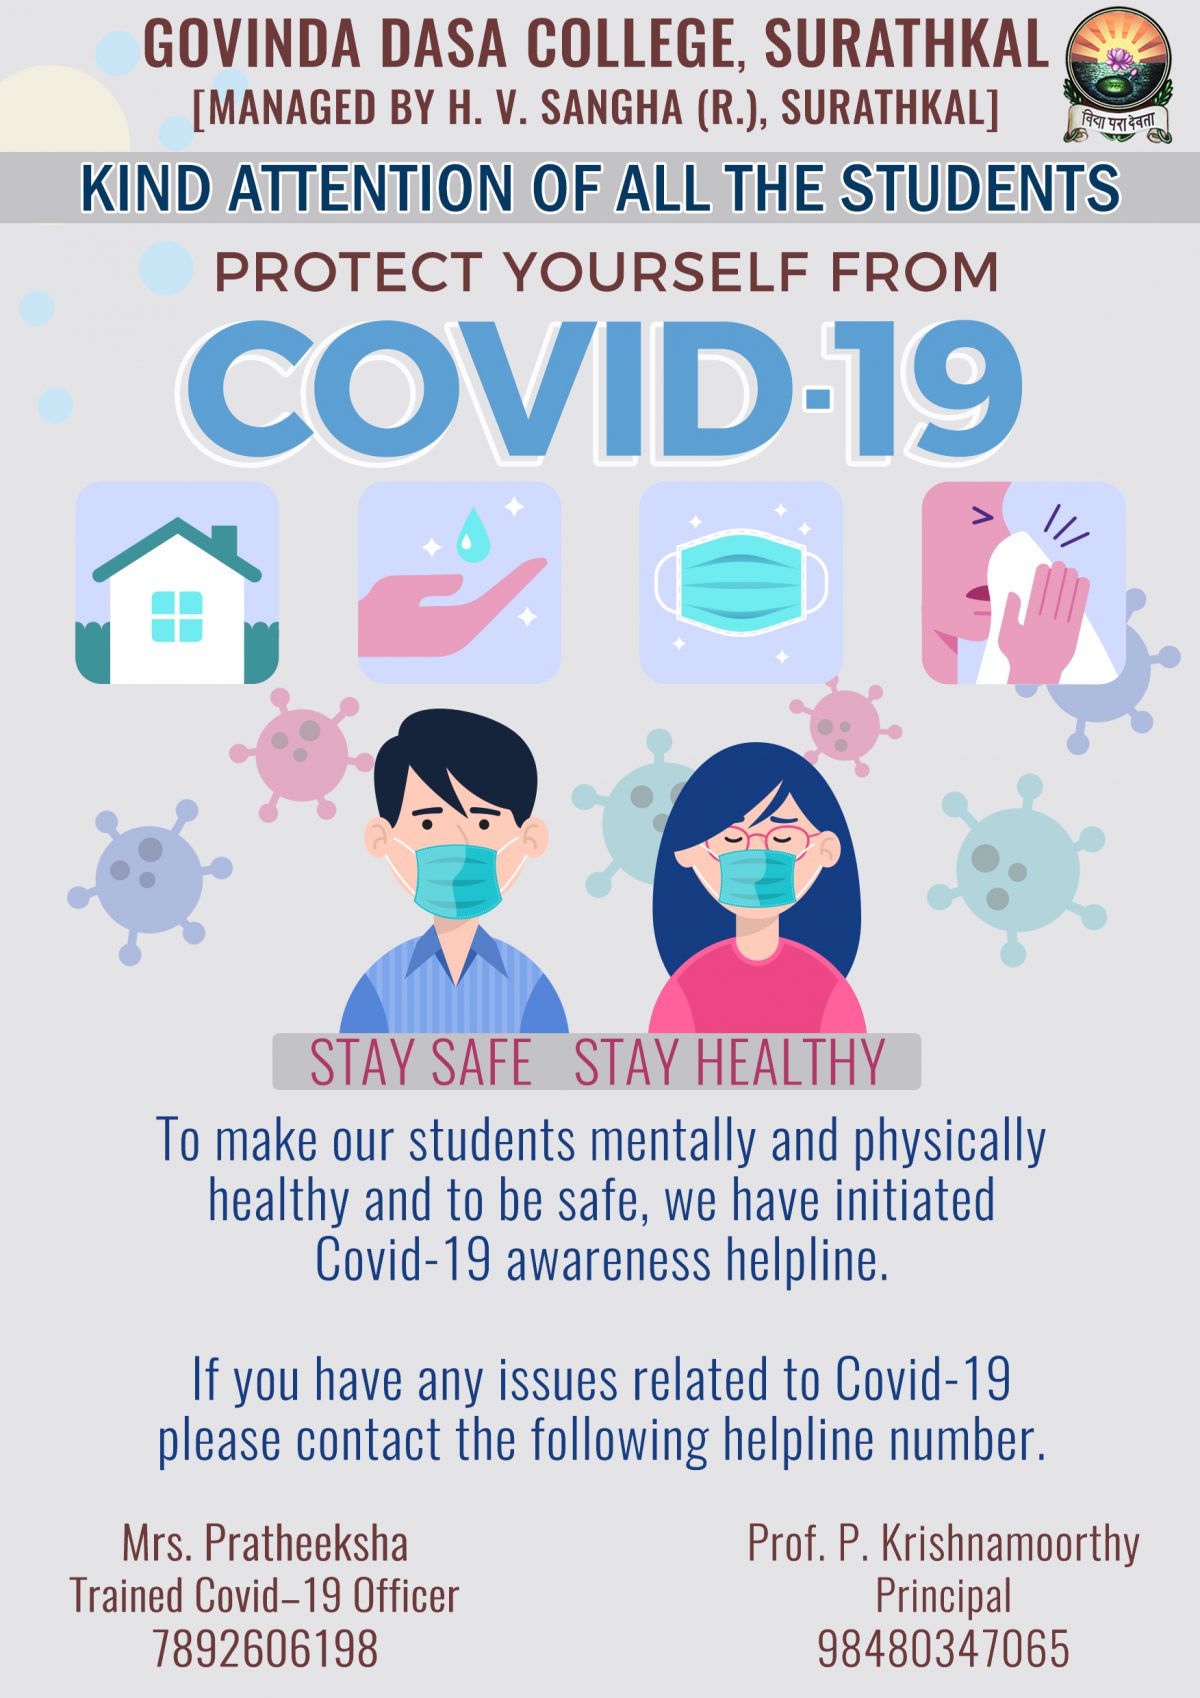 Kind attention to all students protect yourself from “COVID-19”